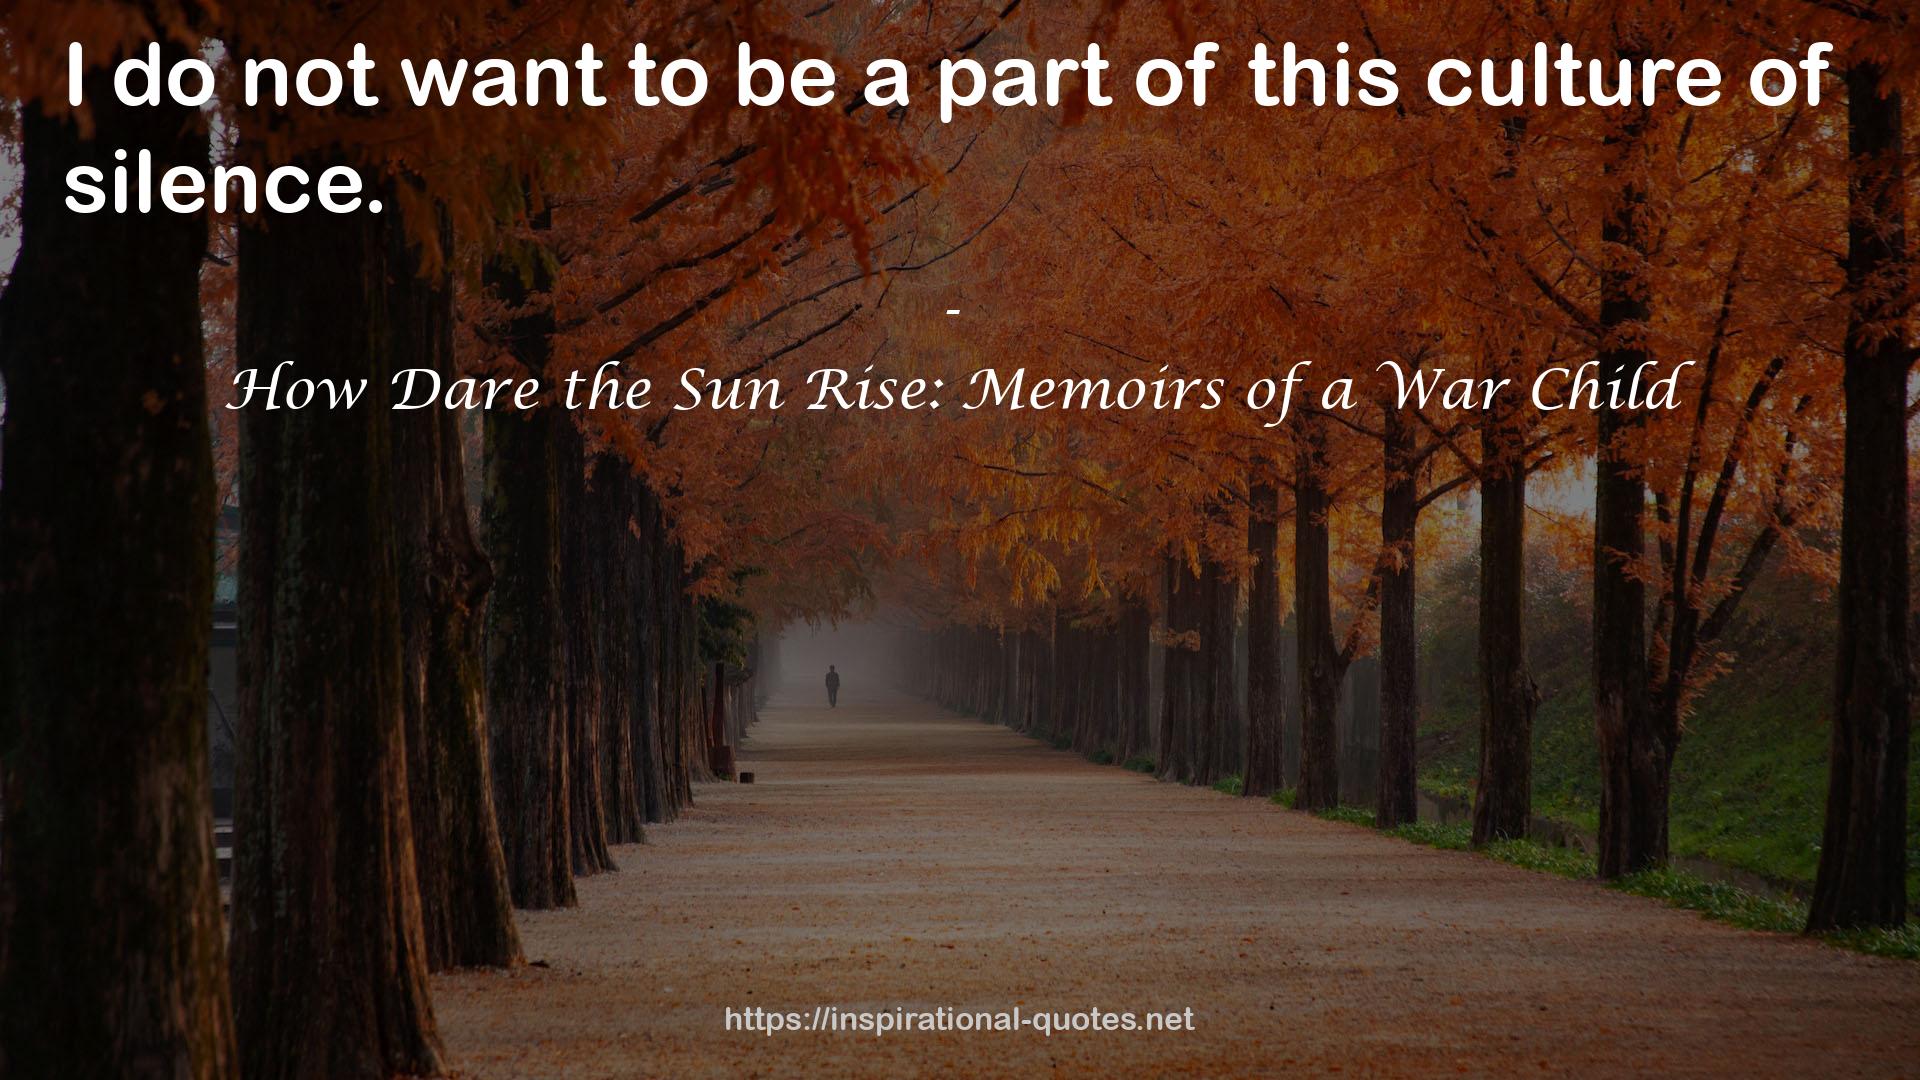 How Dare the Sun Rise: Memoirs of a War Child QUOTES